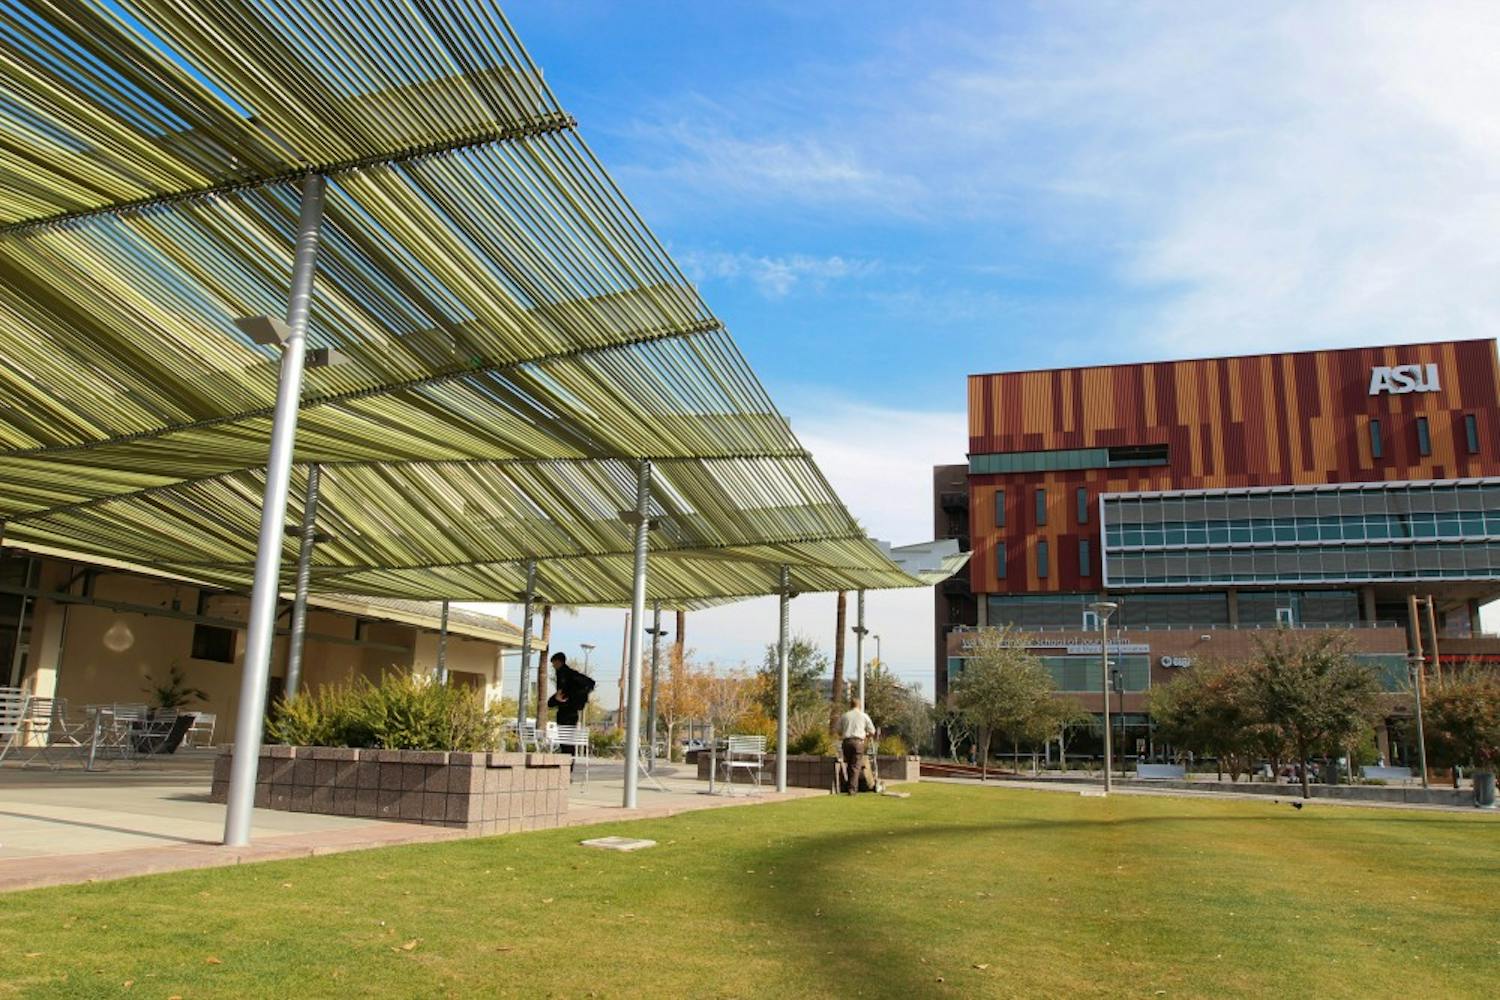 A view of ASU's Downtown Campus, a rapidly growing satellite of ASU Tempe. Even though tuition at ASU has gone up, the increases are comparable across the geographic region, and the University has balanced the effect by continuing to allow ASU to grow. (Photo by Dominic Valente.)